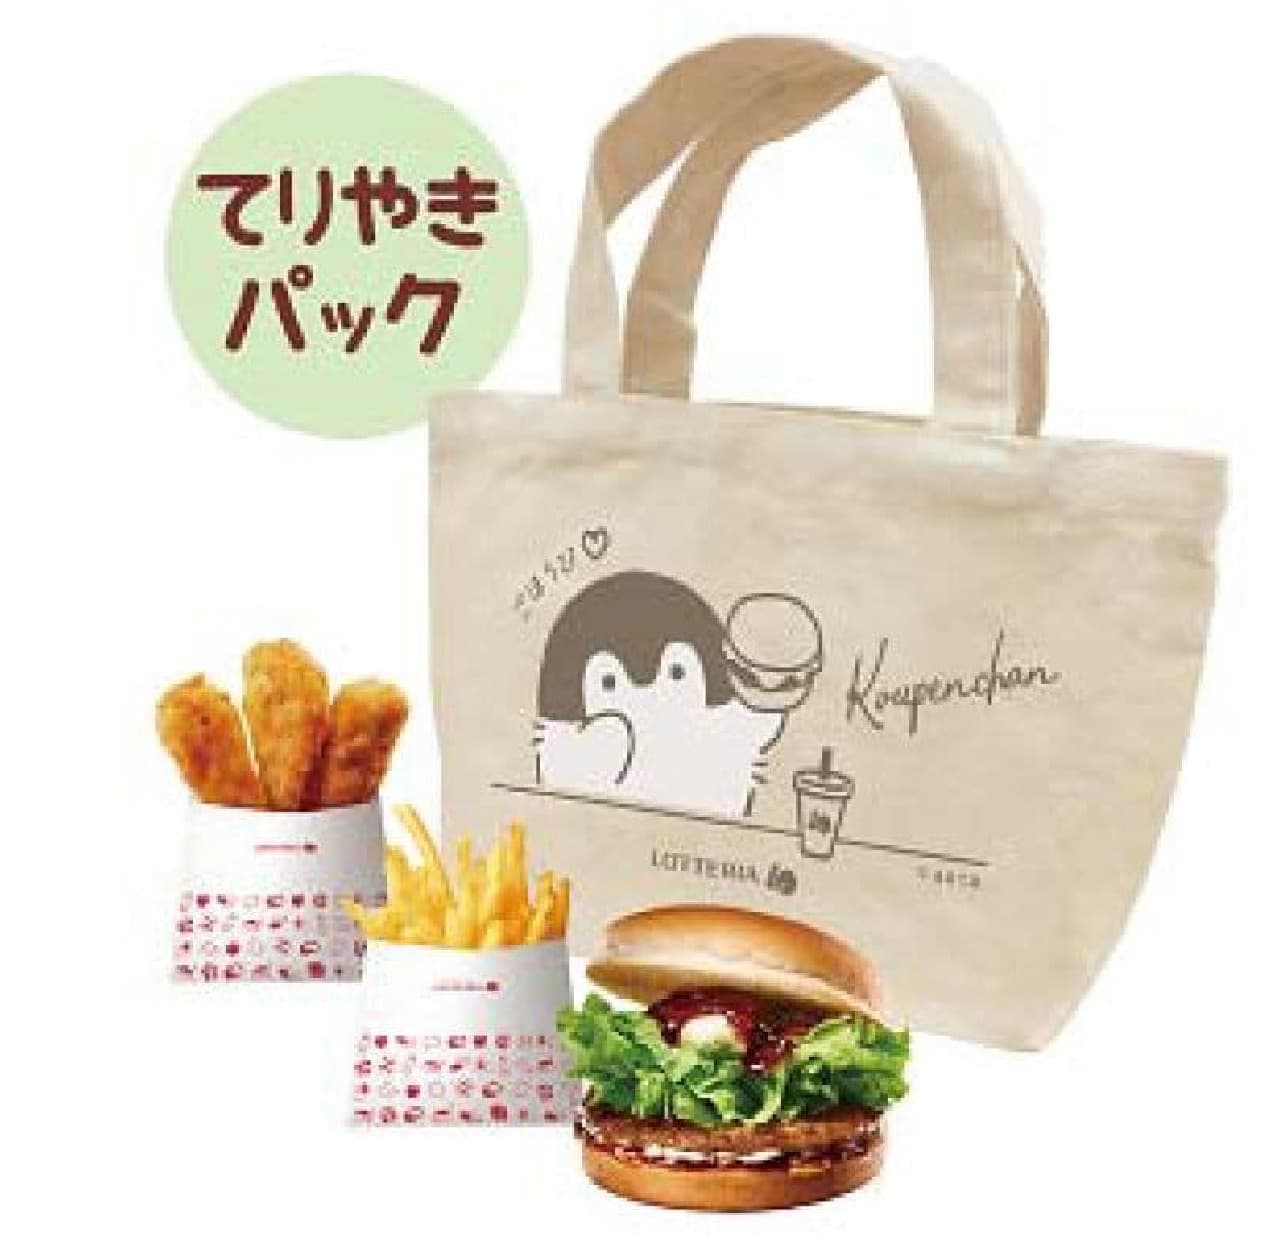 Lotteria "Koupen-chan, always with you, lunch with tote bag, outing teriyaki pack"